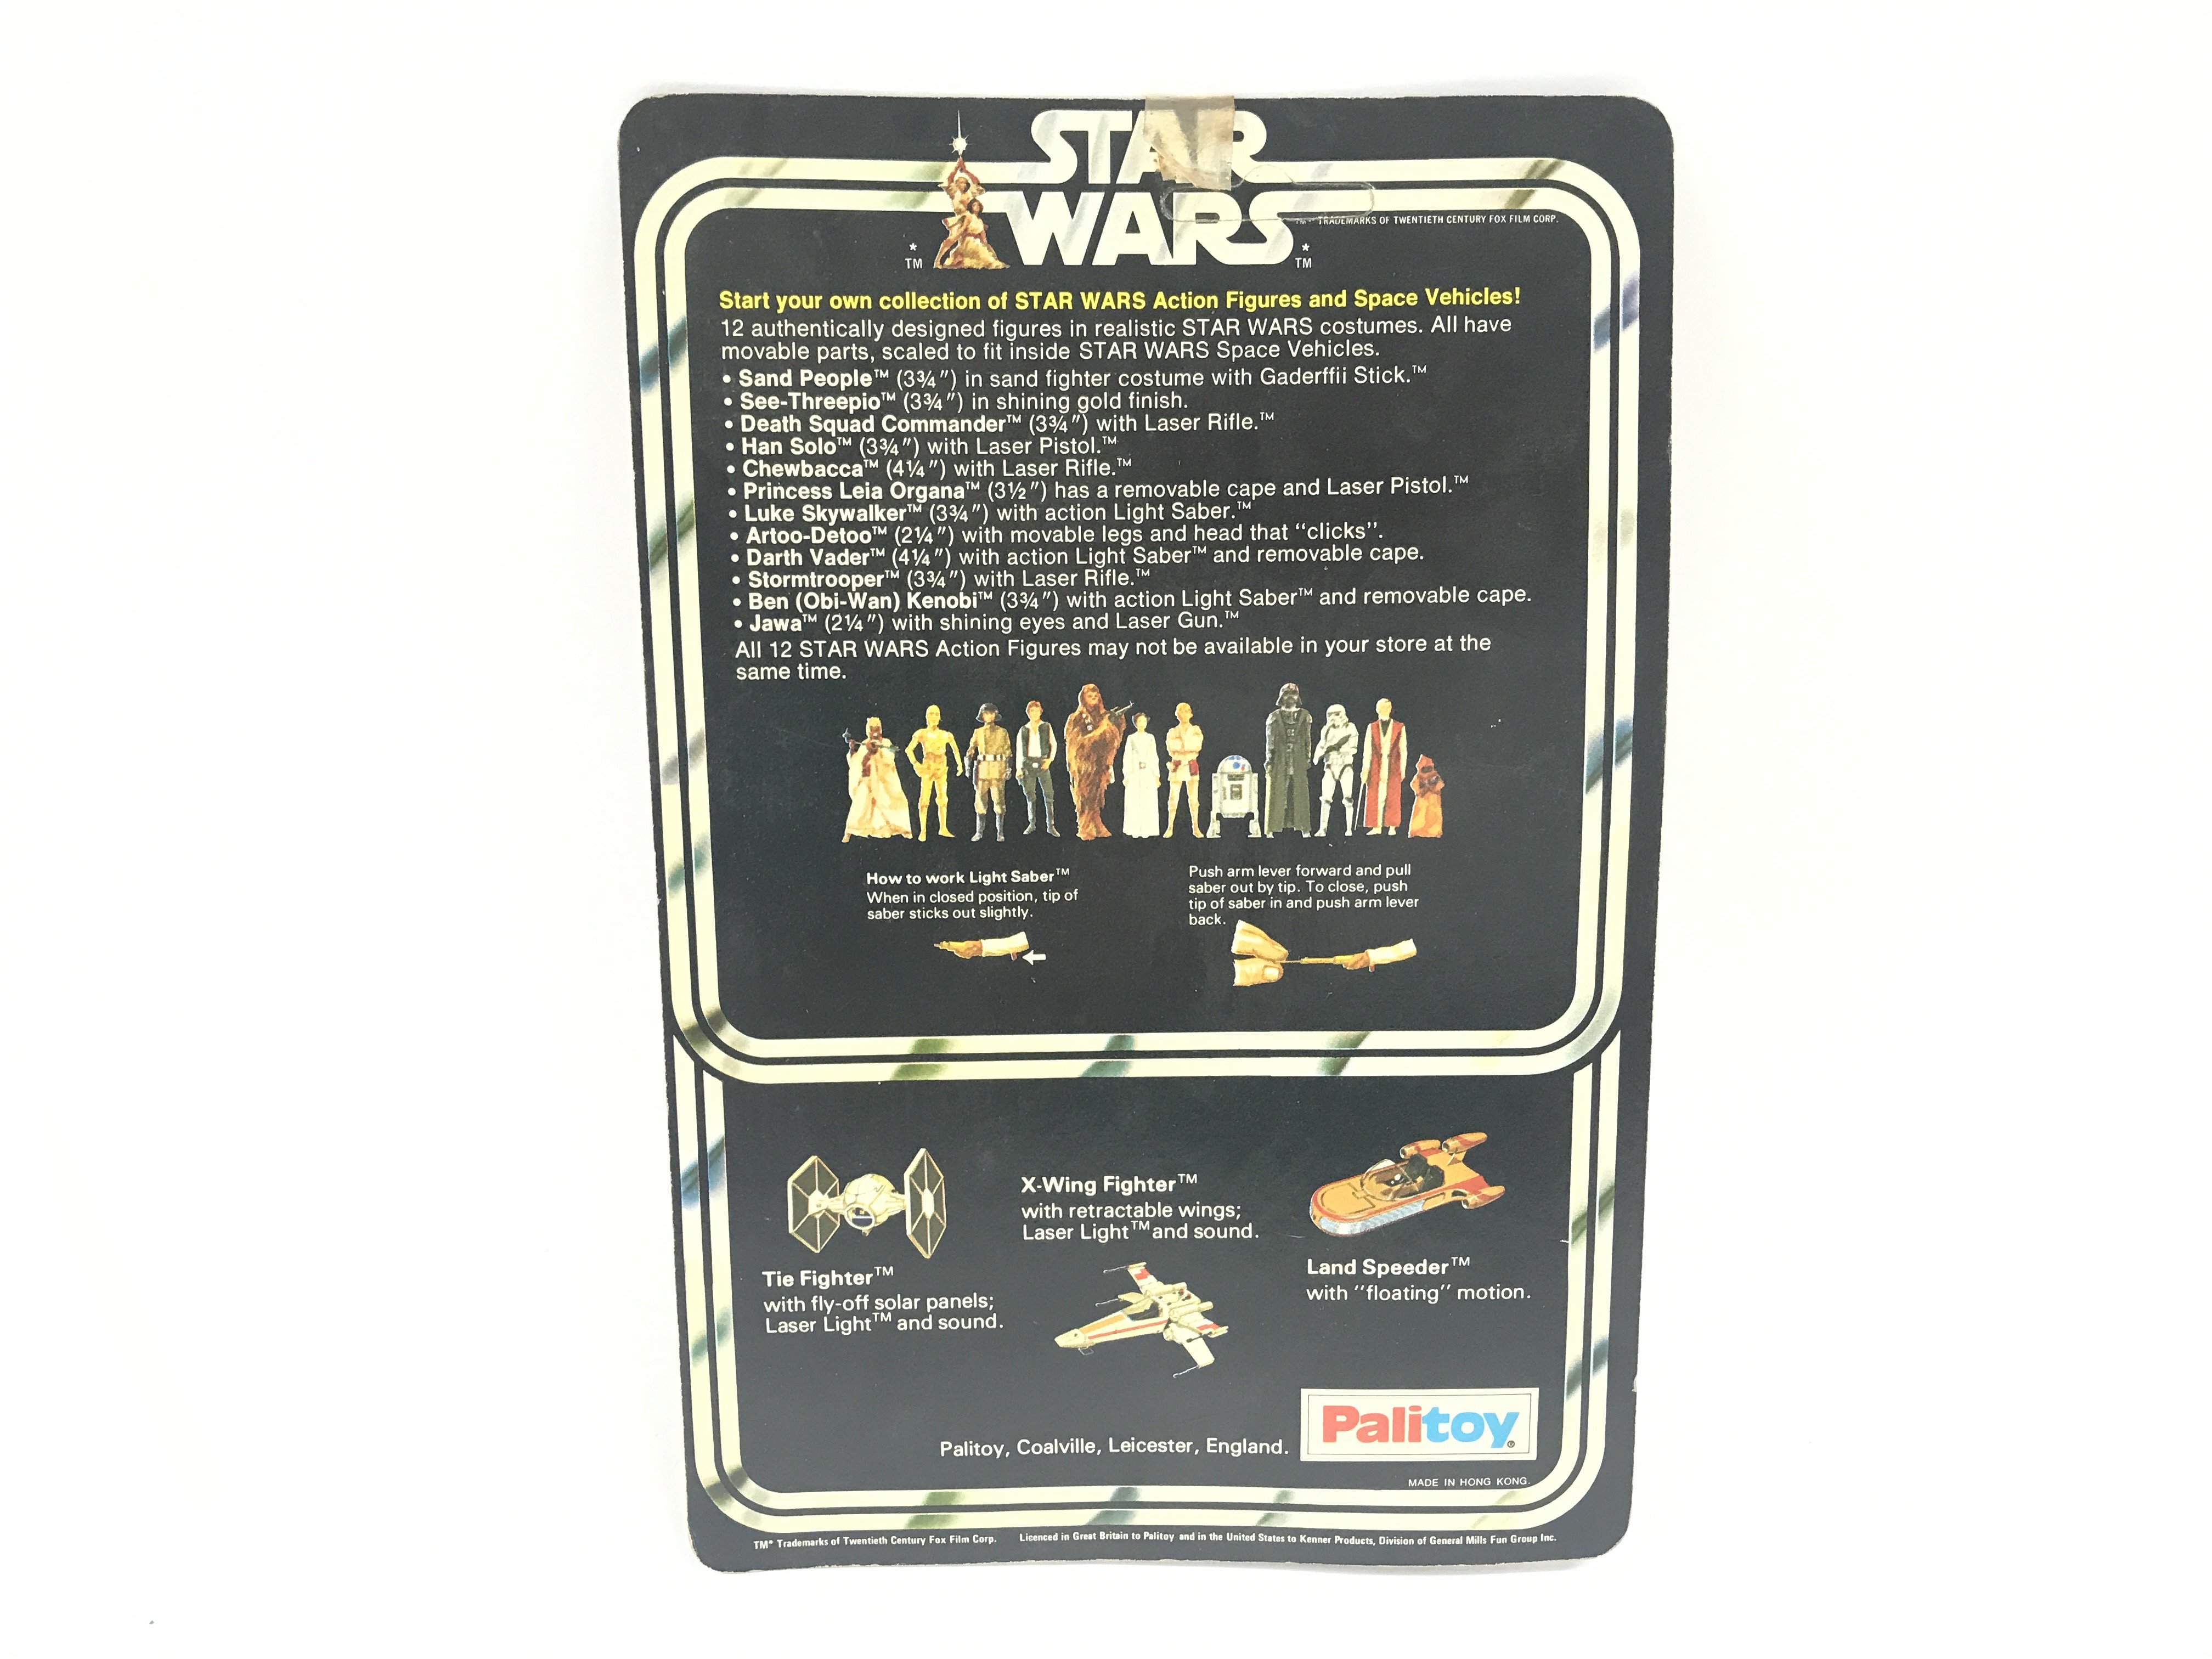 A Vintage Star Wars Palitoy 1977 Carded Darth Vade - Image 2 of 4